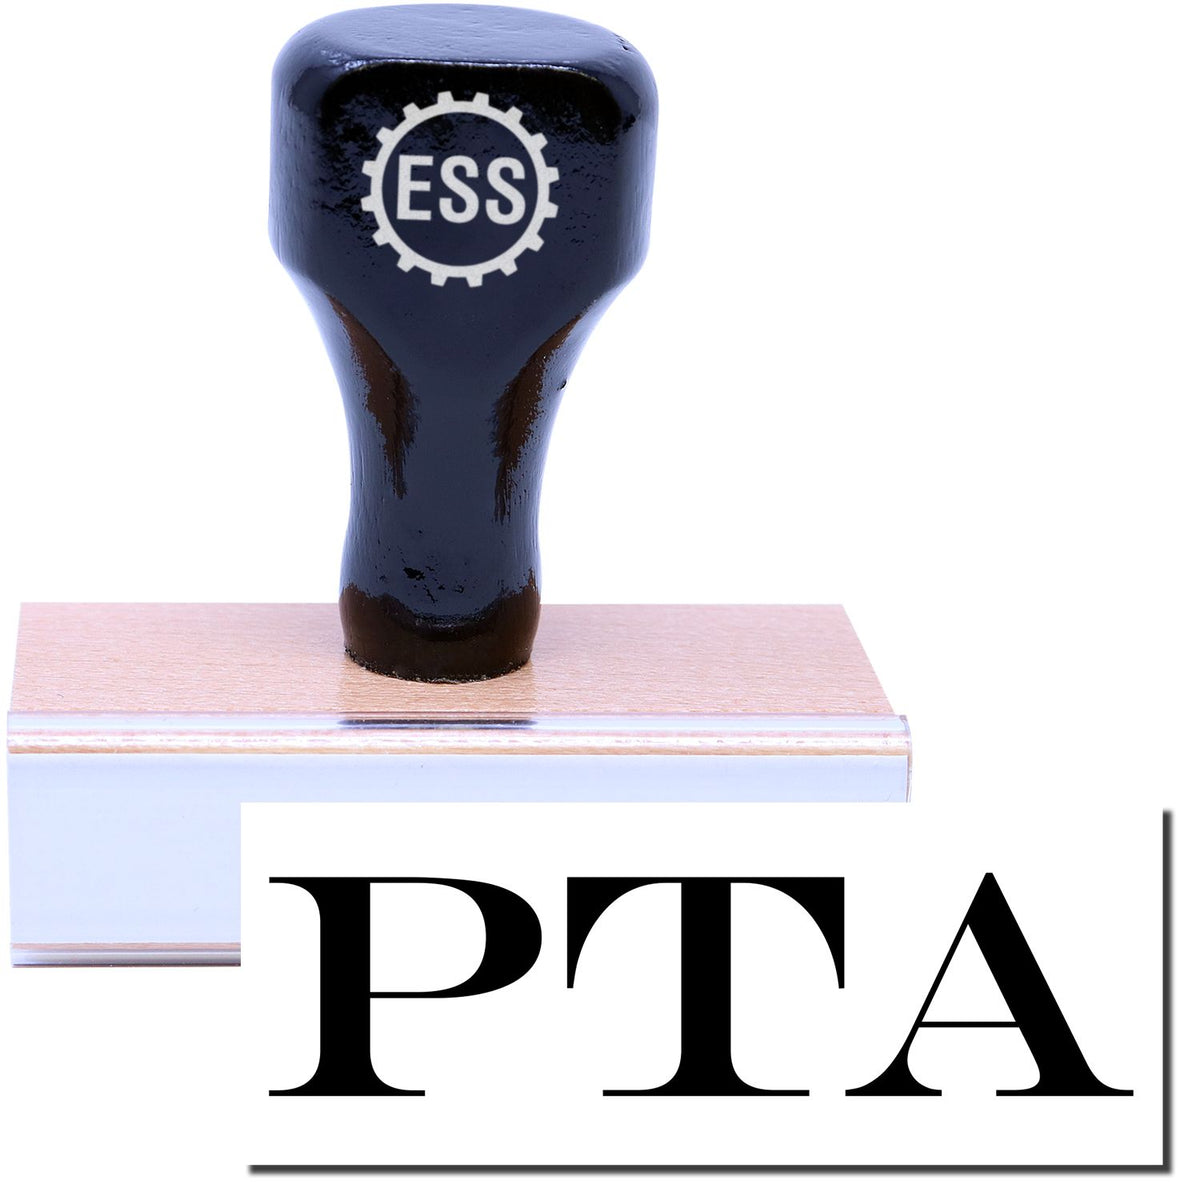 A stock office rubber stamp with a stamped image showing how the text &quot;PTA&quot; in a large font is displayed after stamping.